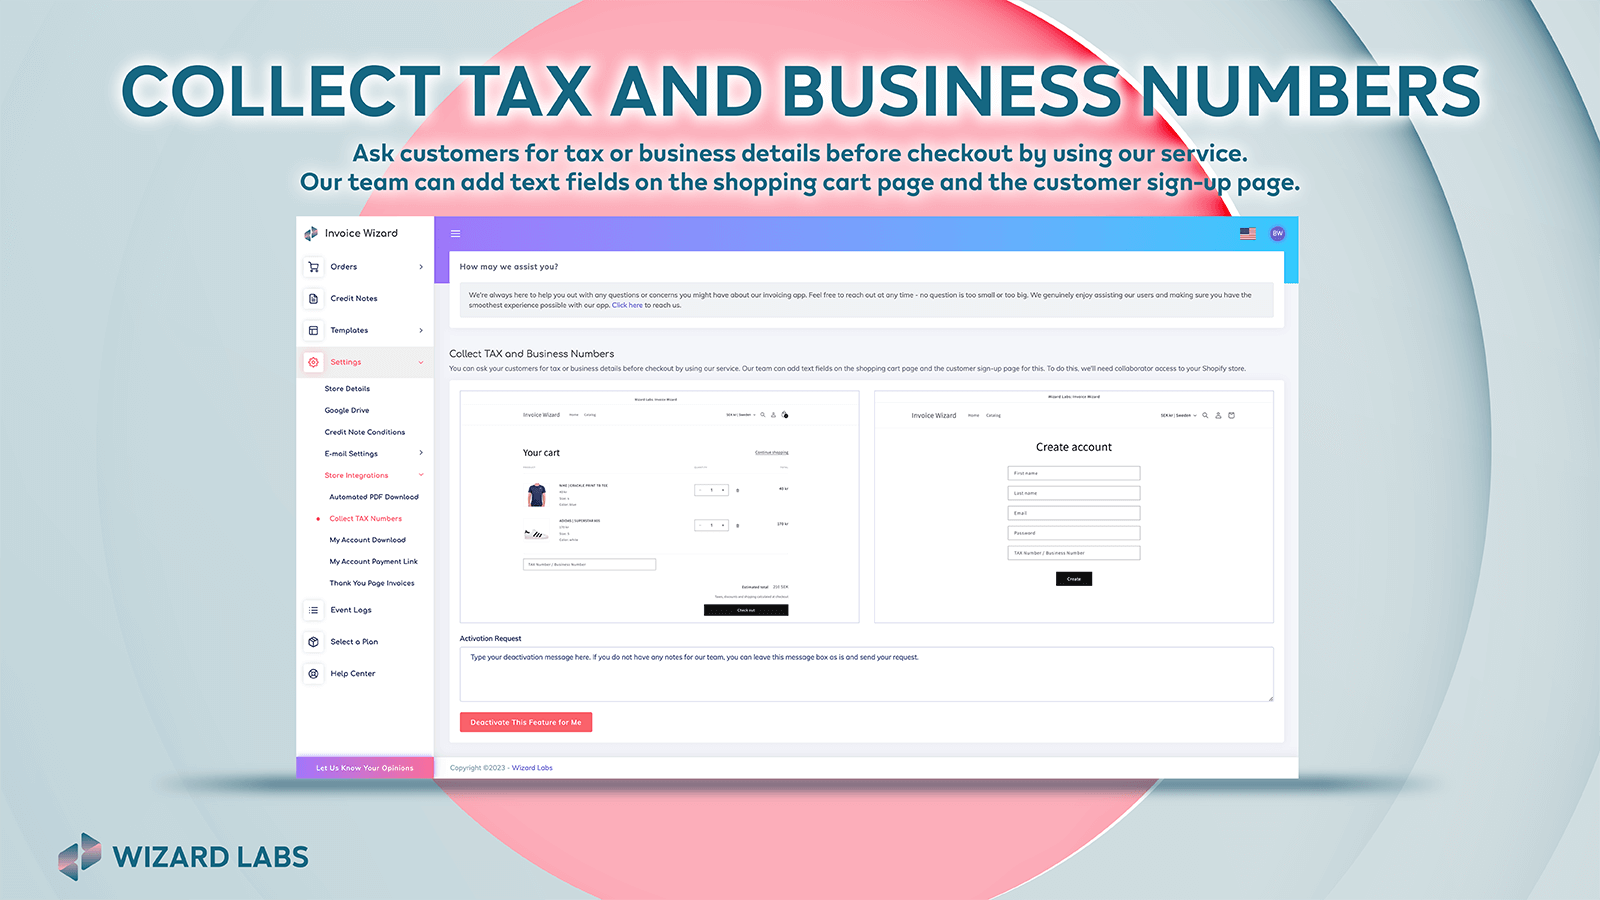 Collect tax and business numbers.